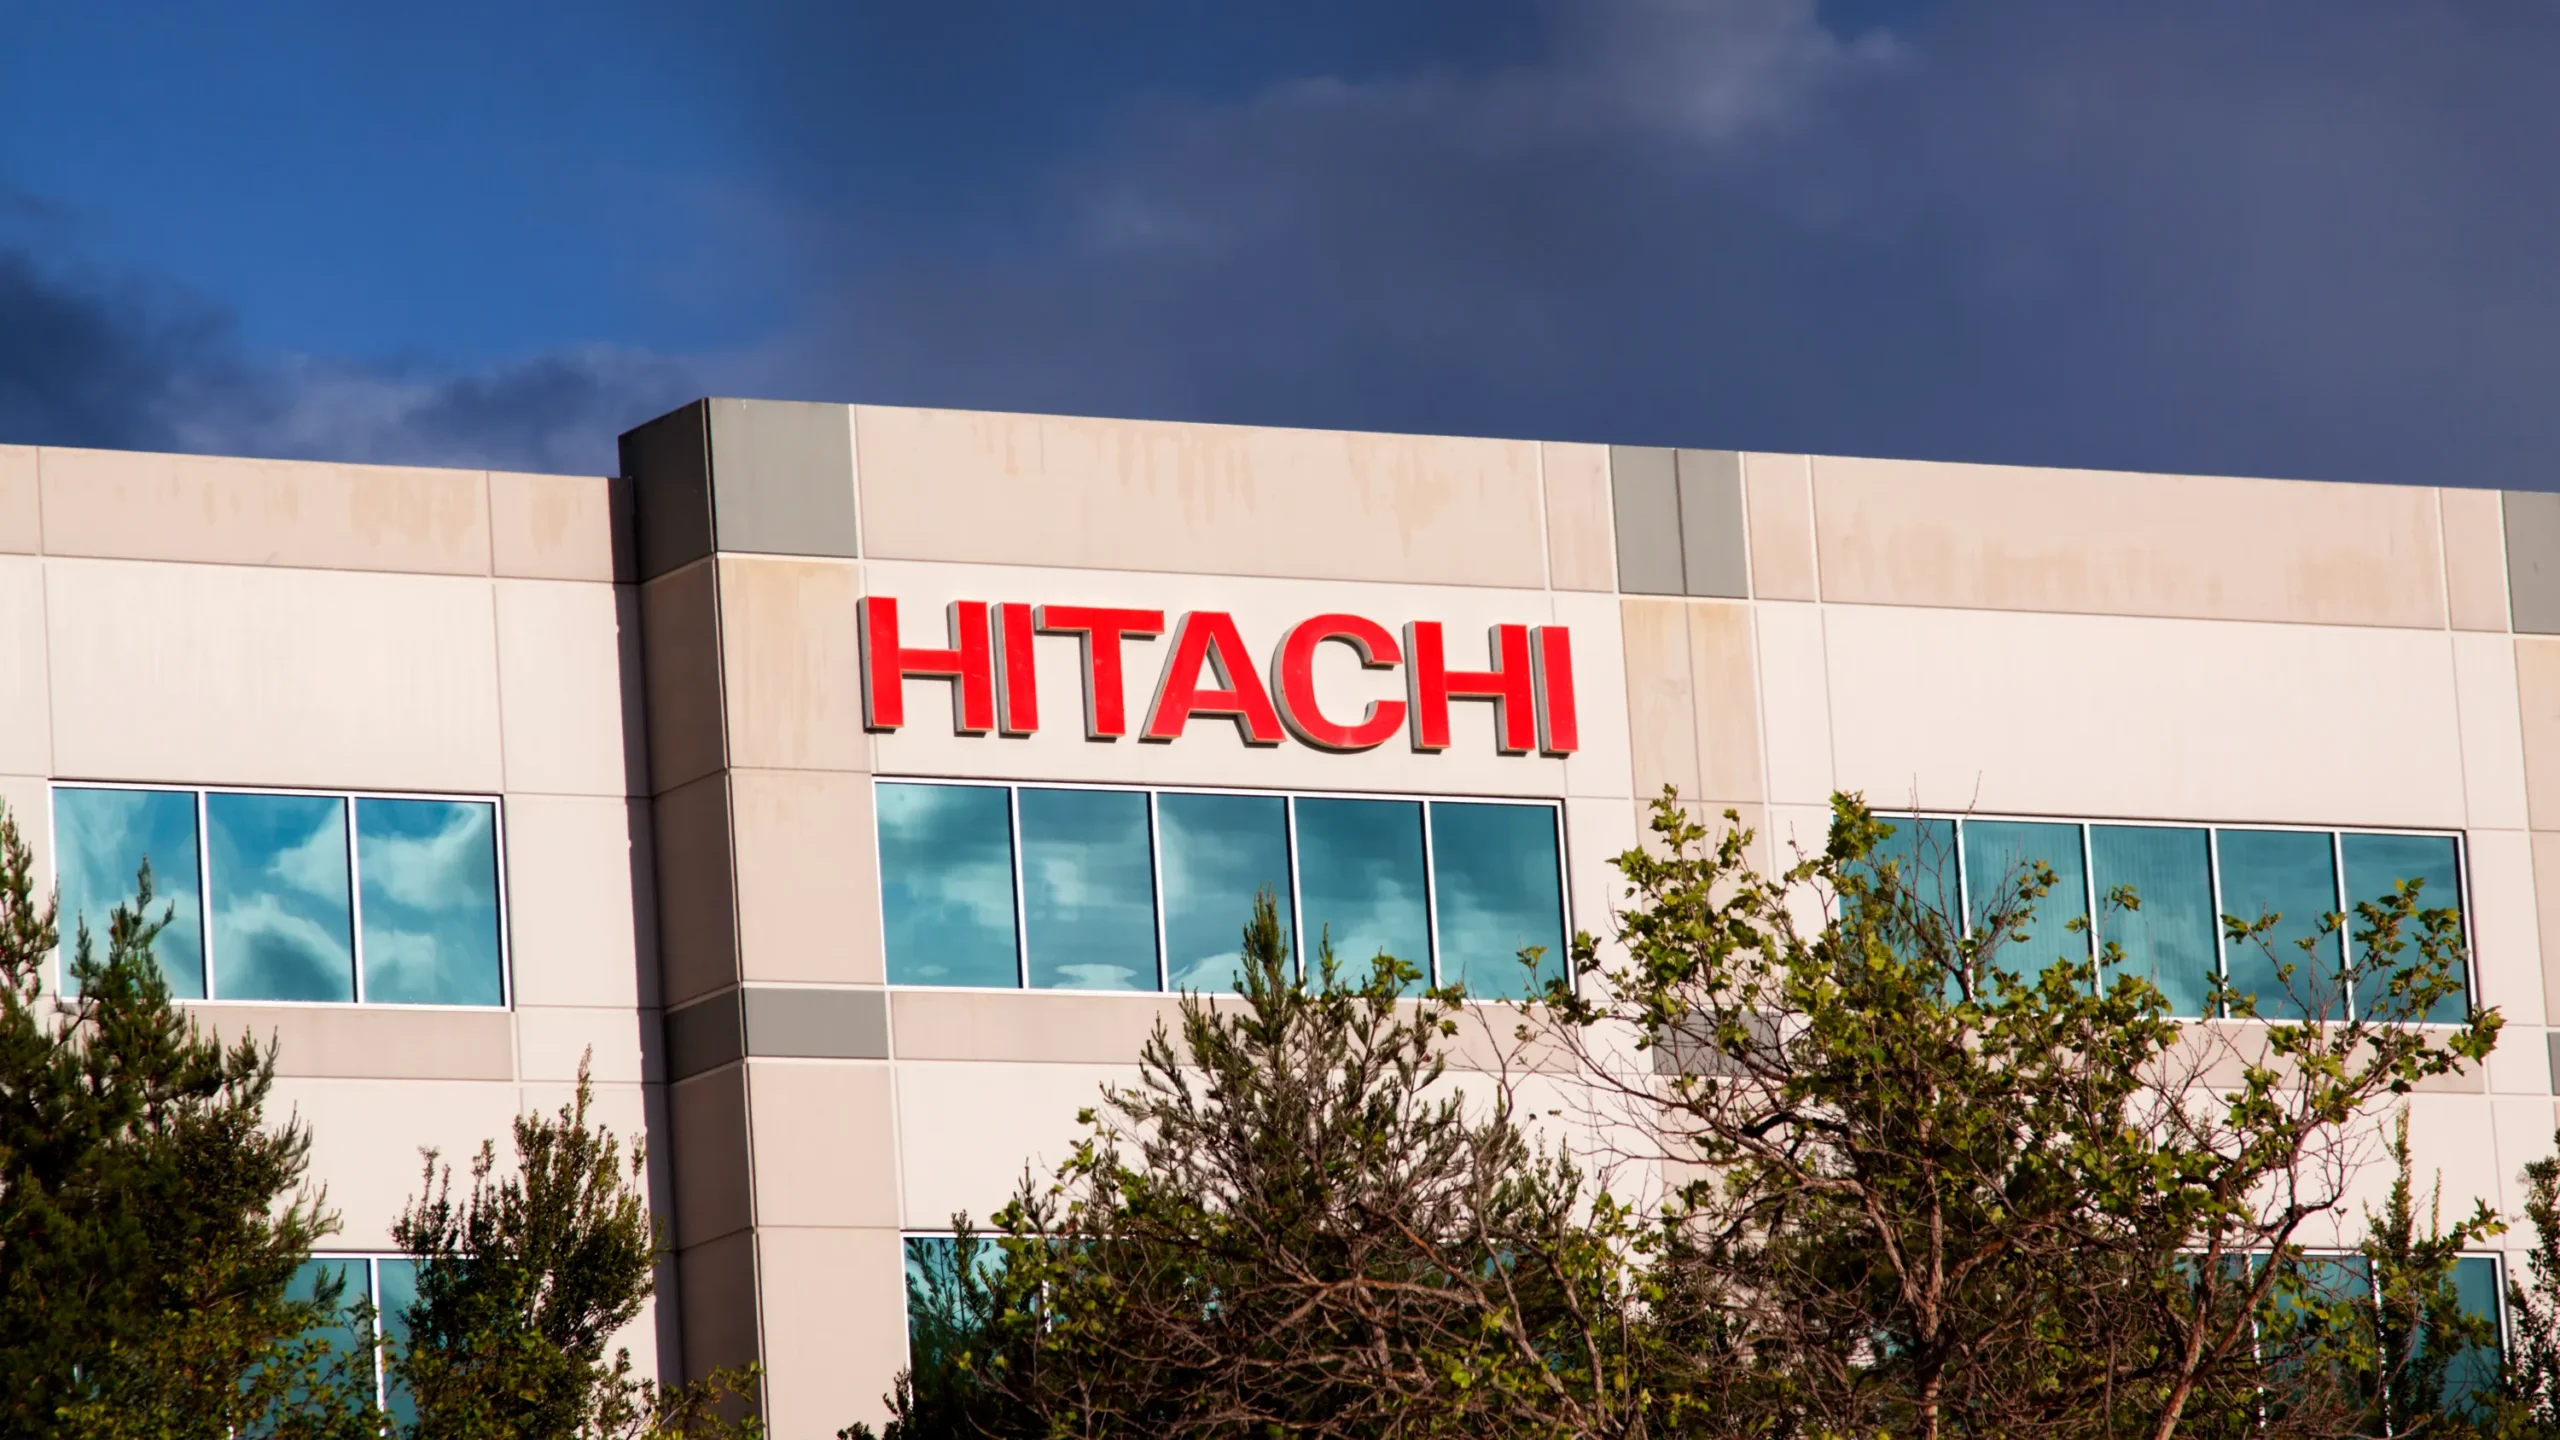 Is Hitachi Launching Its New Headquarters In America?